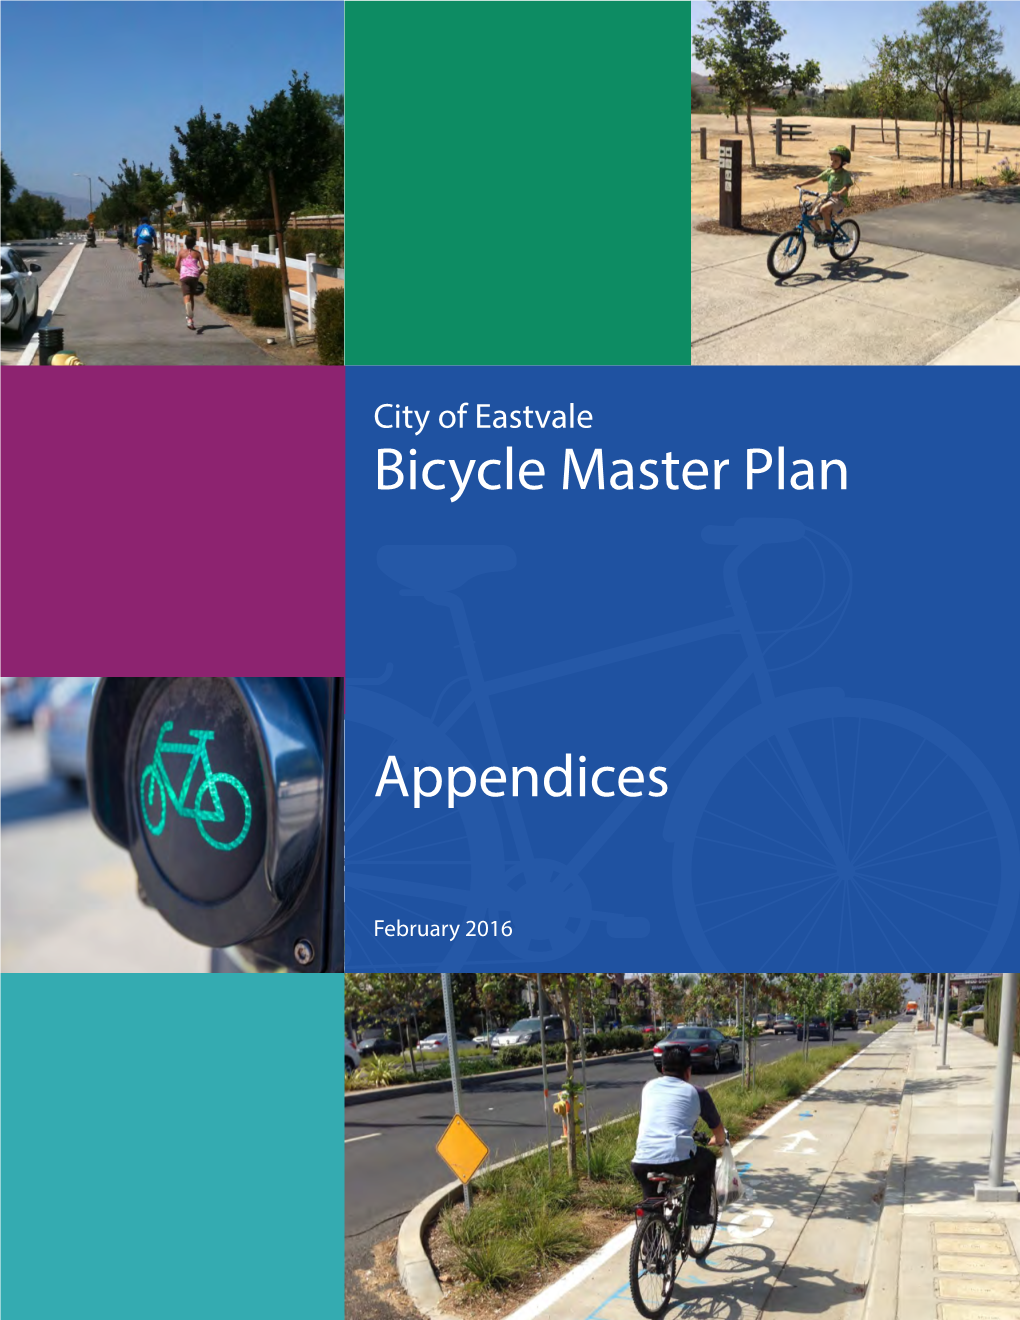 City of Eastvale Bicycle Master Plan